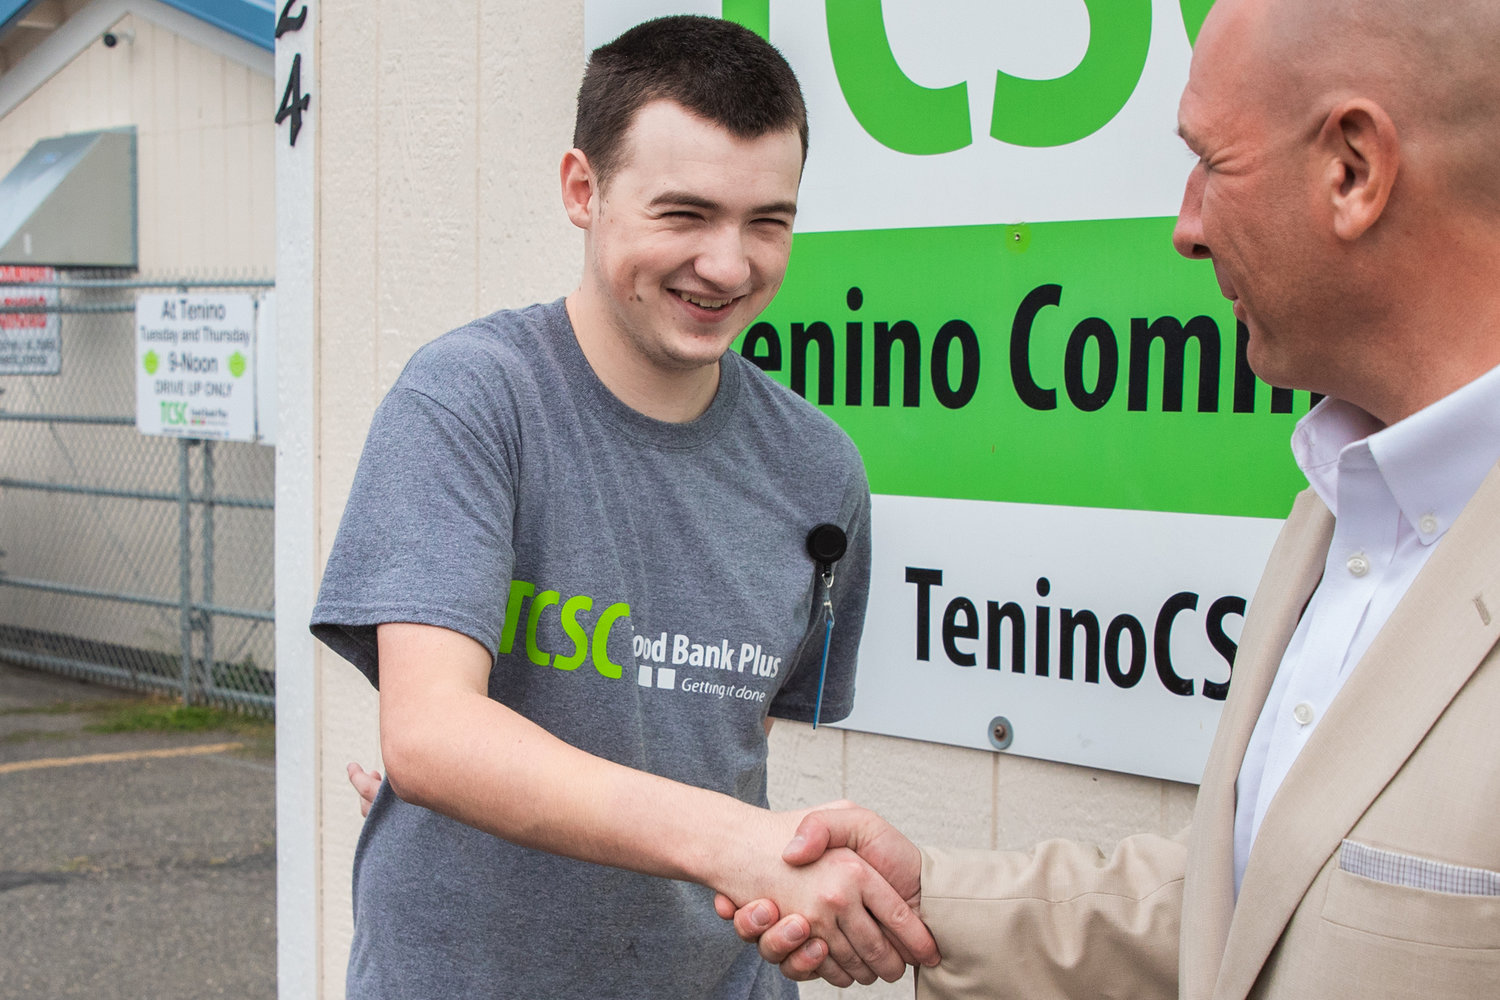 State Rep. Peter Abbarno smiles while shaking the hand of Korbin Pearson, 21, a Tenino graduate with special needs who works at the location three days a week as part of a newly established program at Tenino Food Bank Plus.